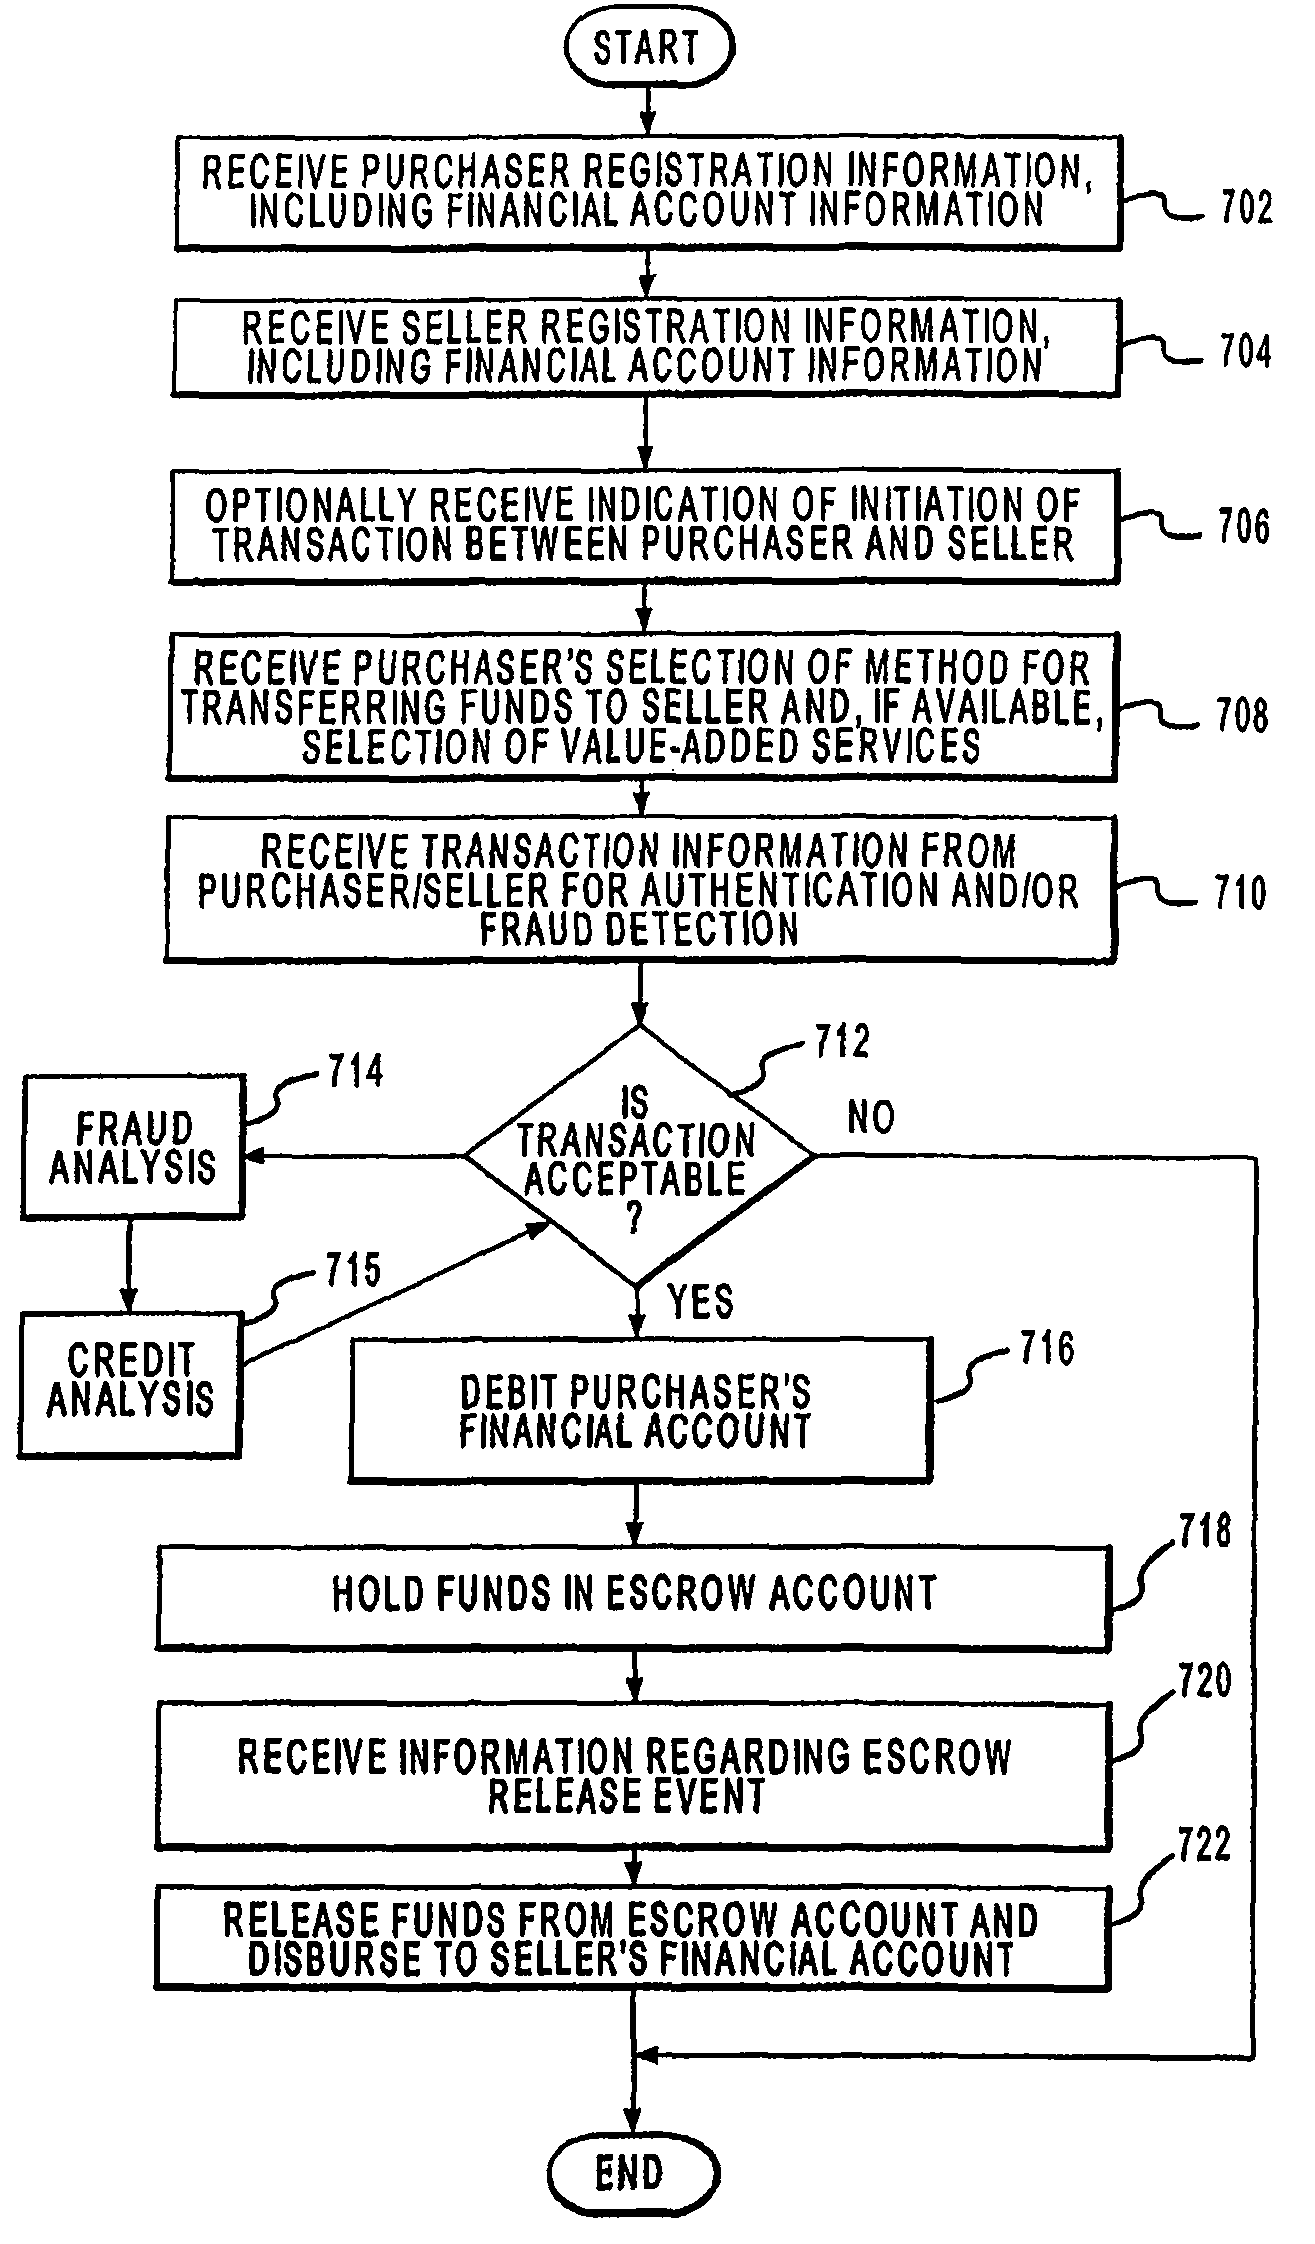 Systems and methods for allocating an amount between transaction accounts